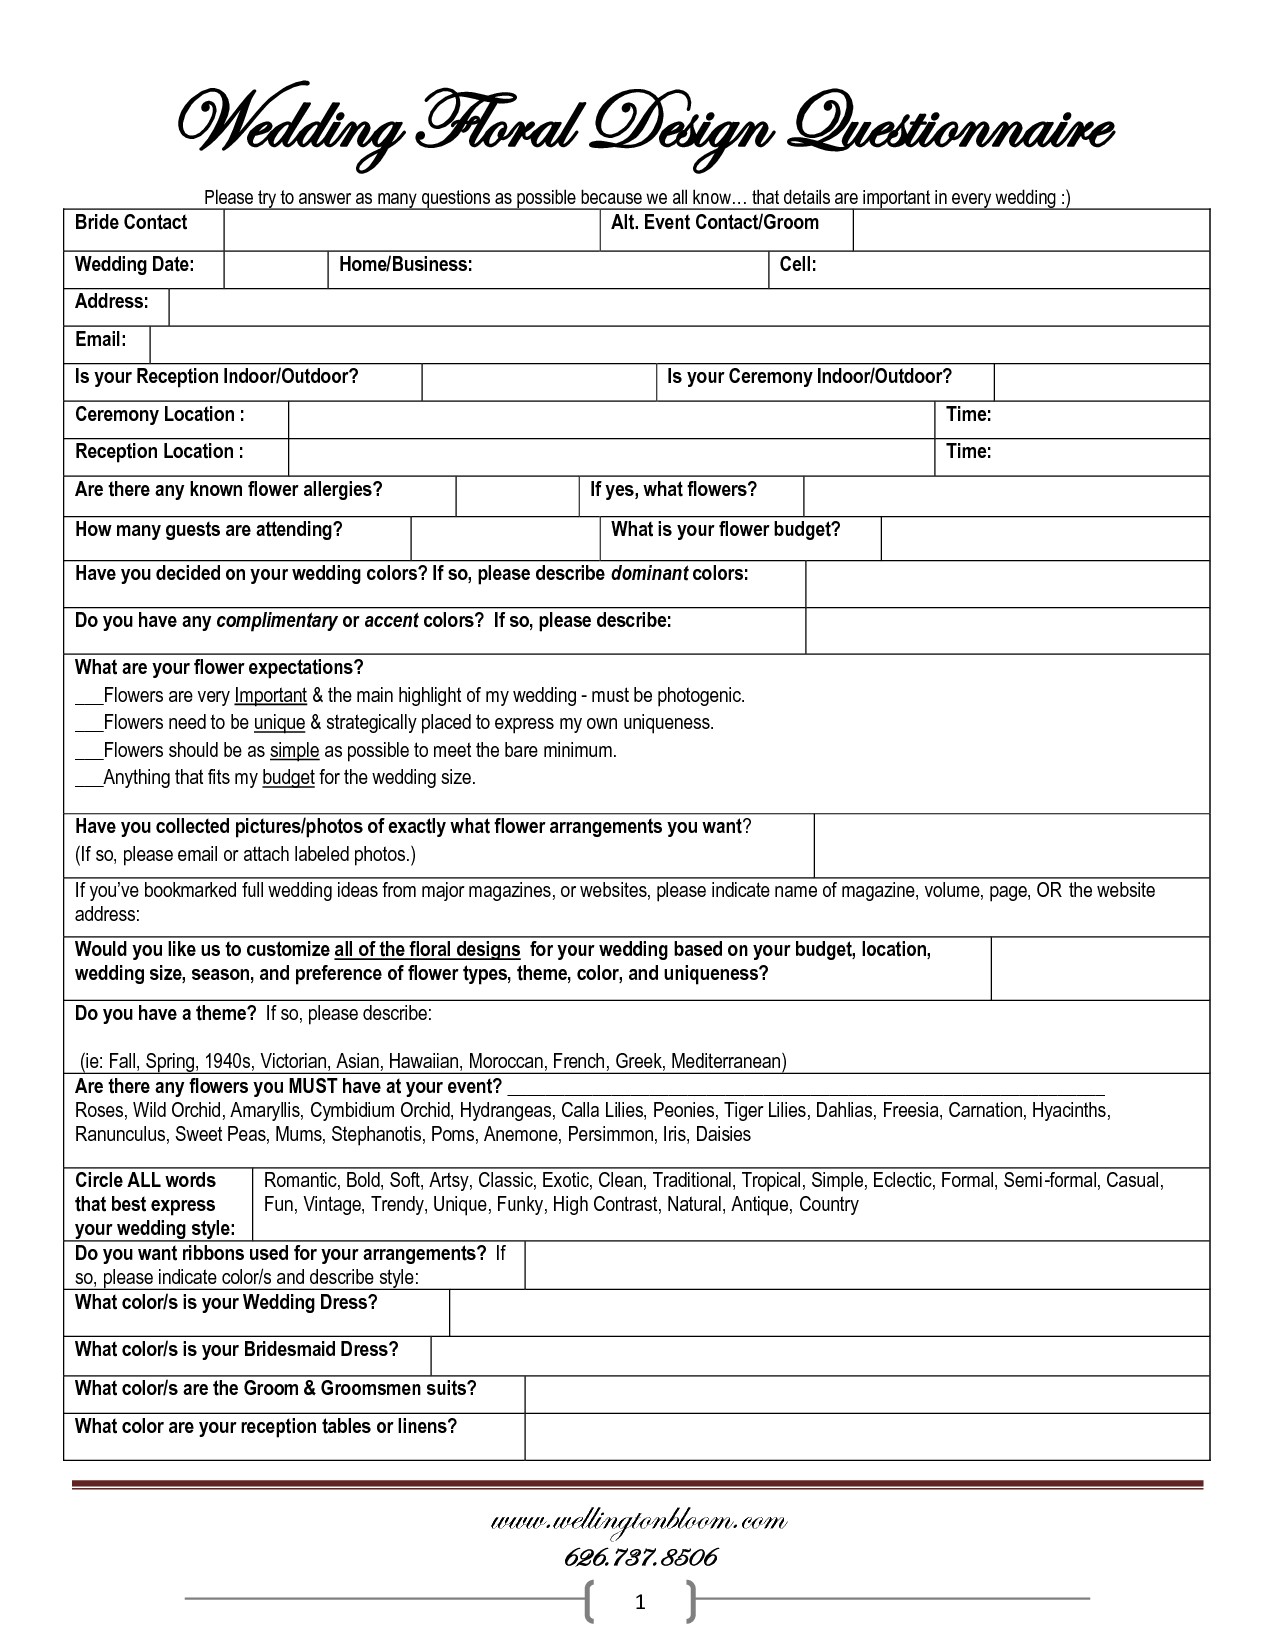 Wedding Planner Questionnaire Template Google Search Document Florist Contract